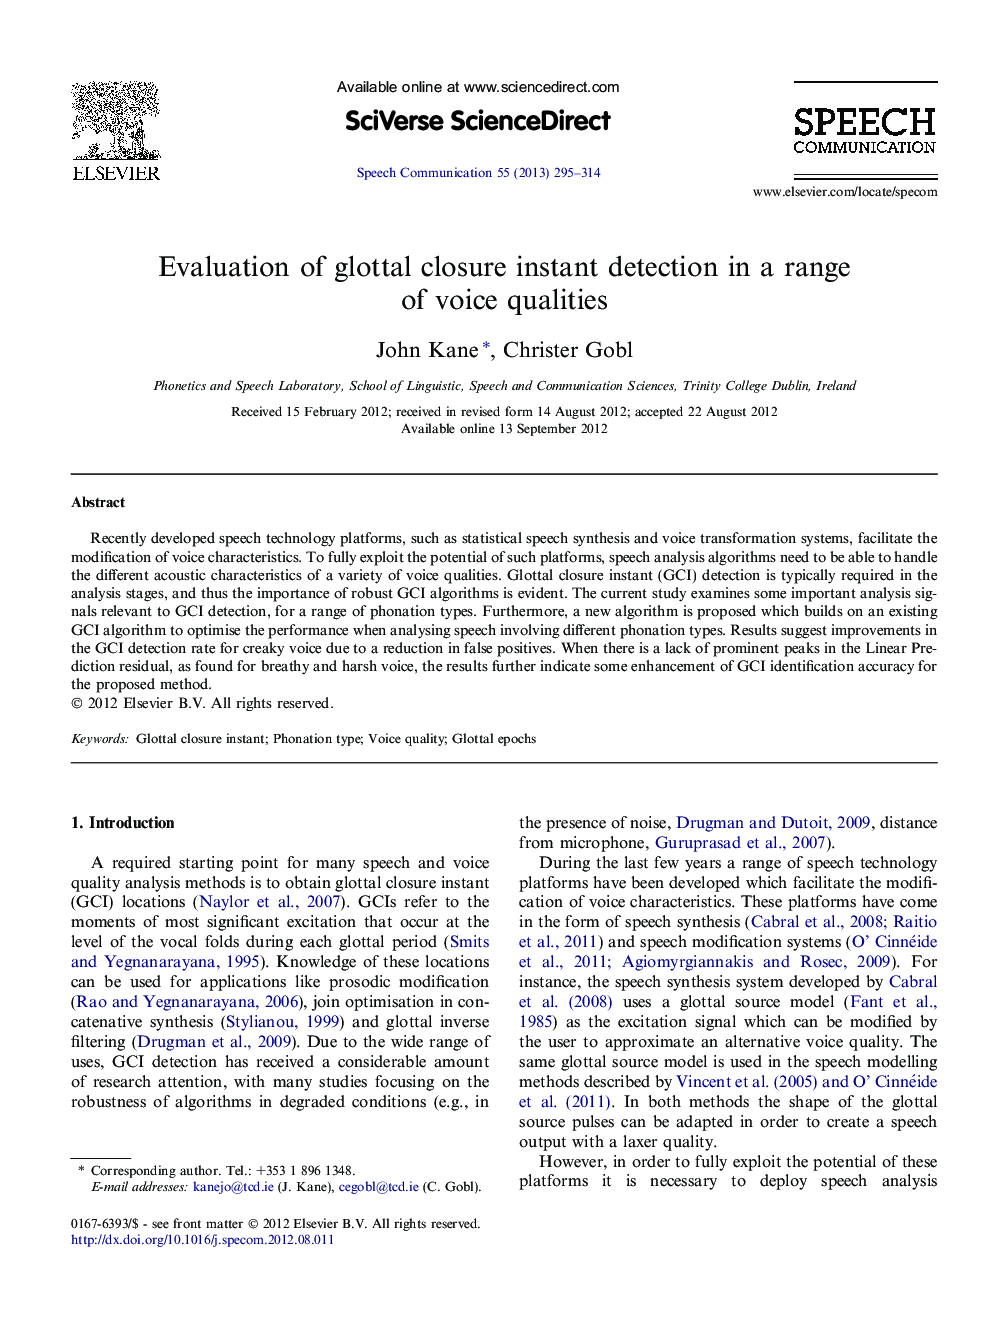 Evaluation of glottal closure instant detection in a range of voice qualities